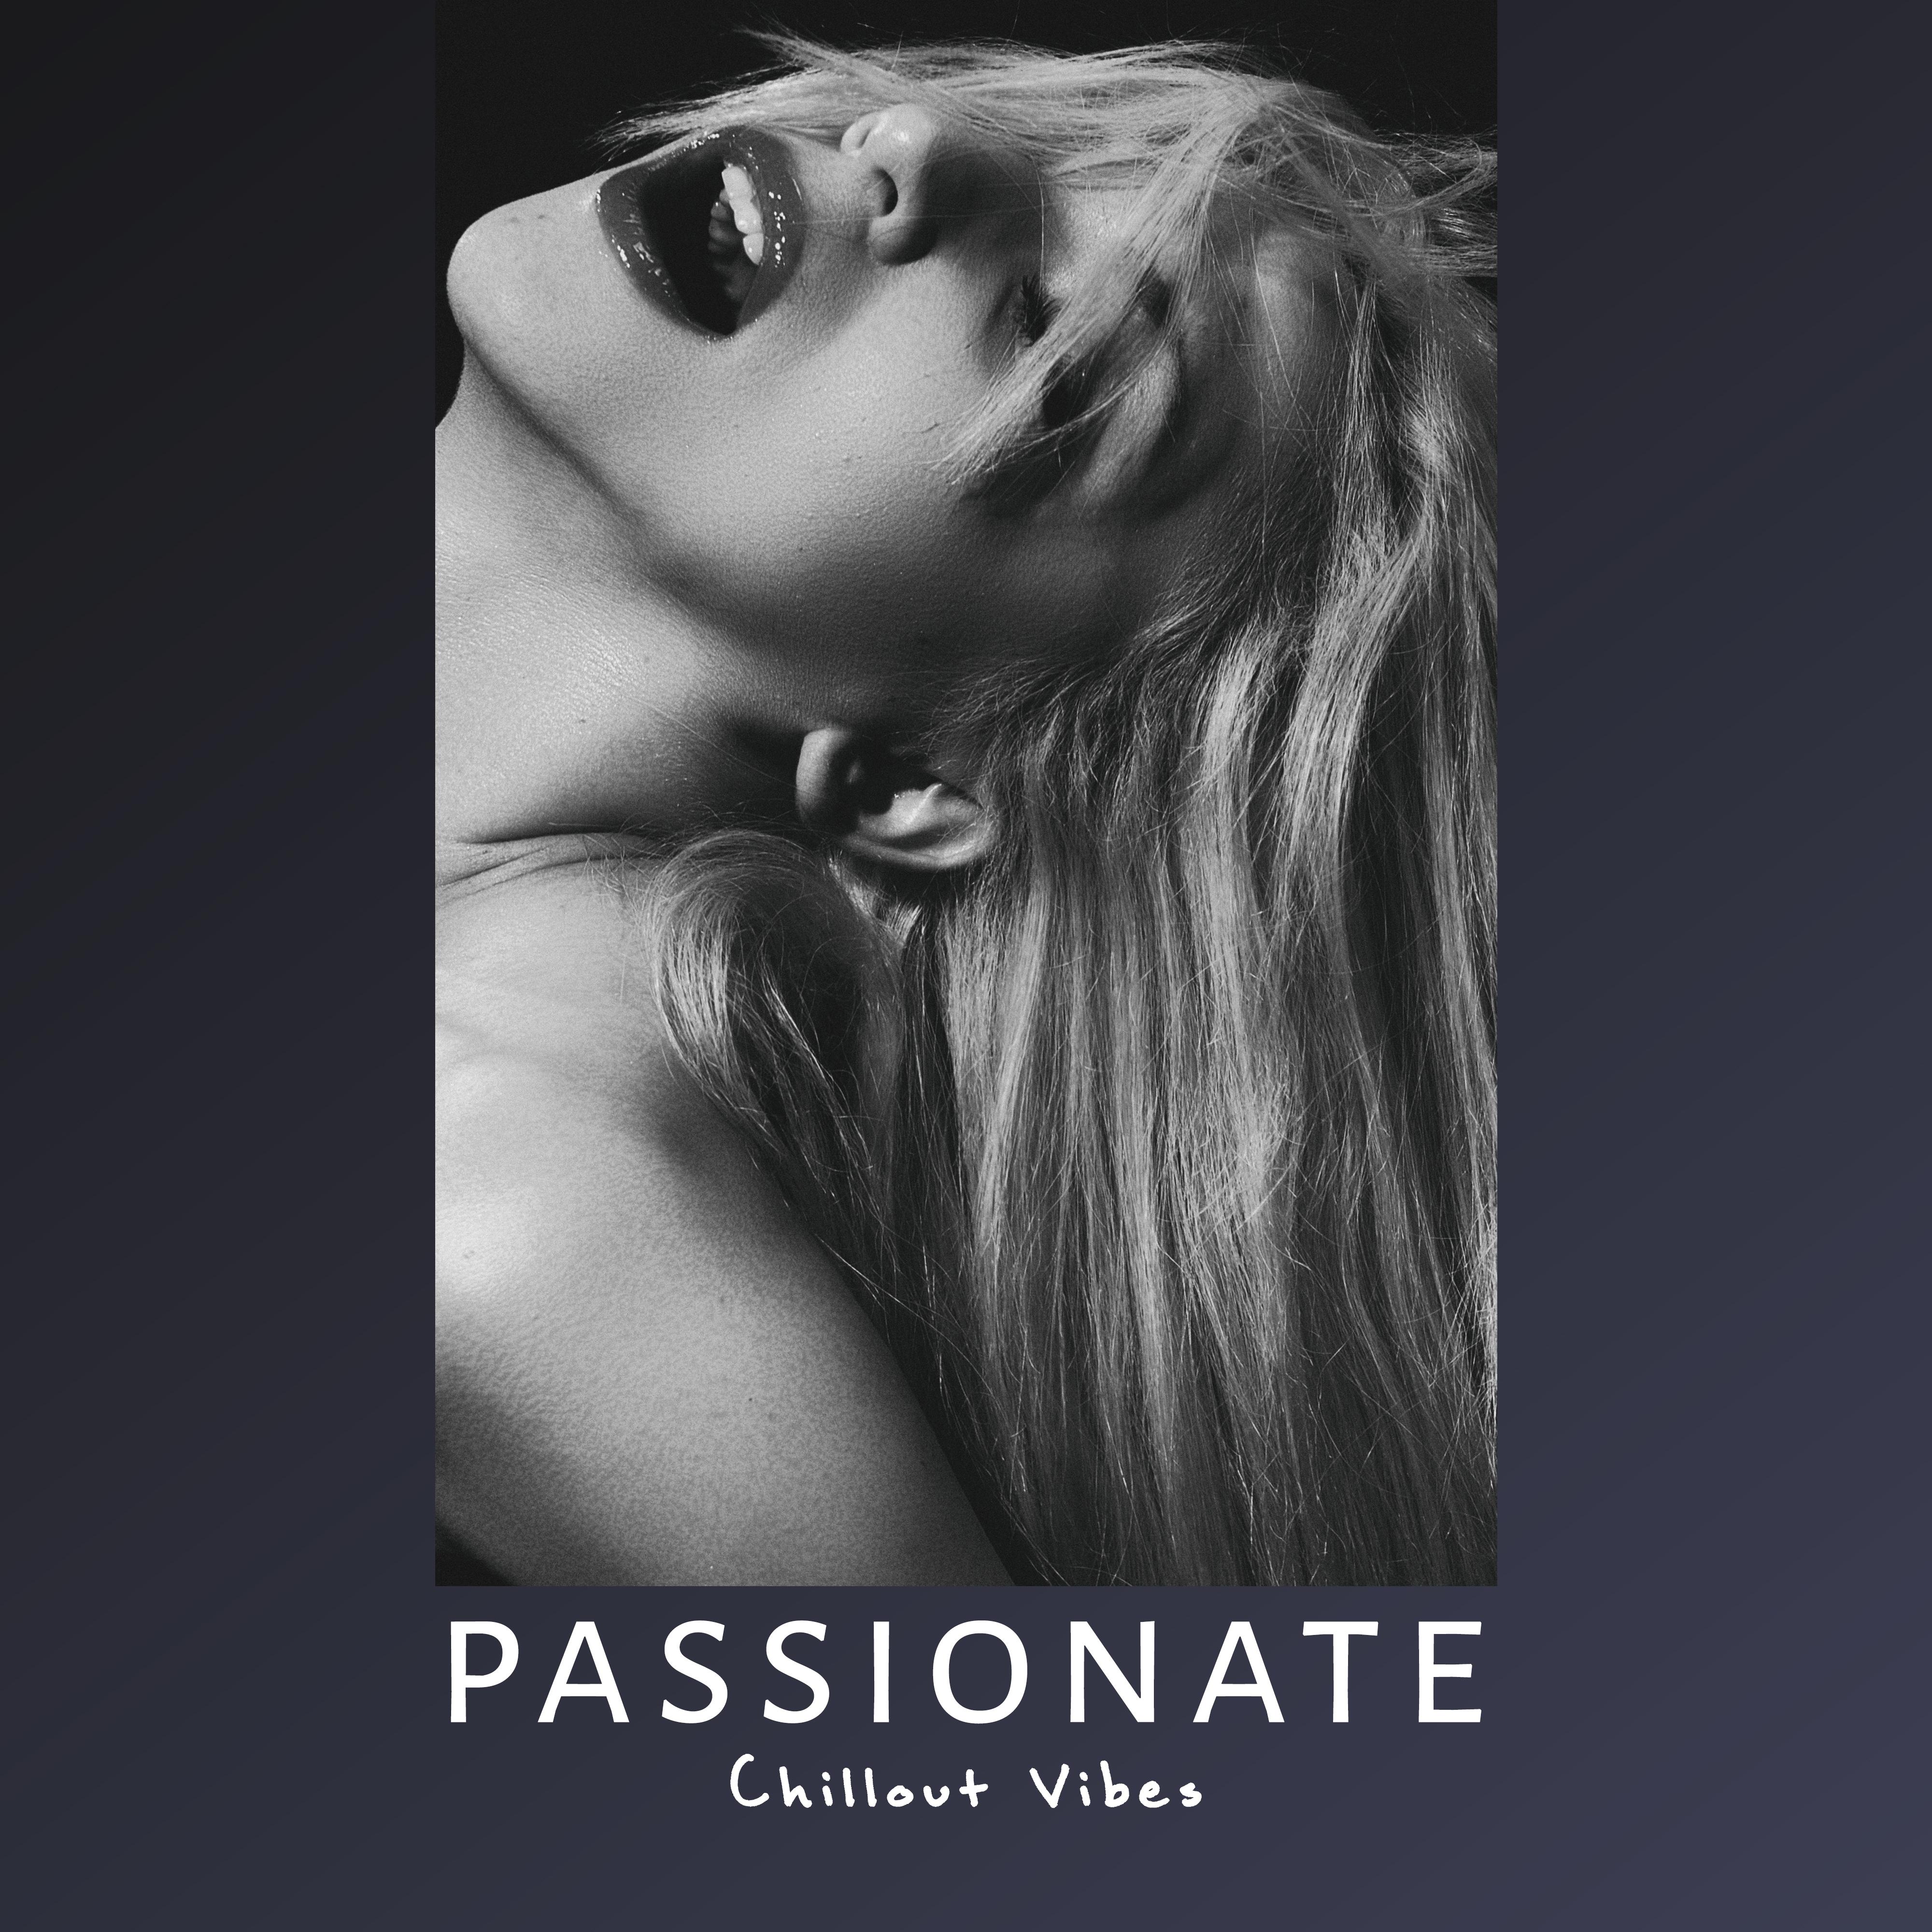 Passionate Chillout Vibes: 2019 Chill Out Erotic Beats, Music Created for Lust & Passion, Pleasure *** Beats